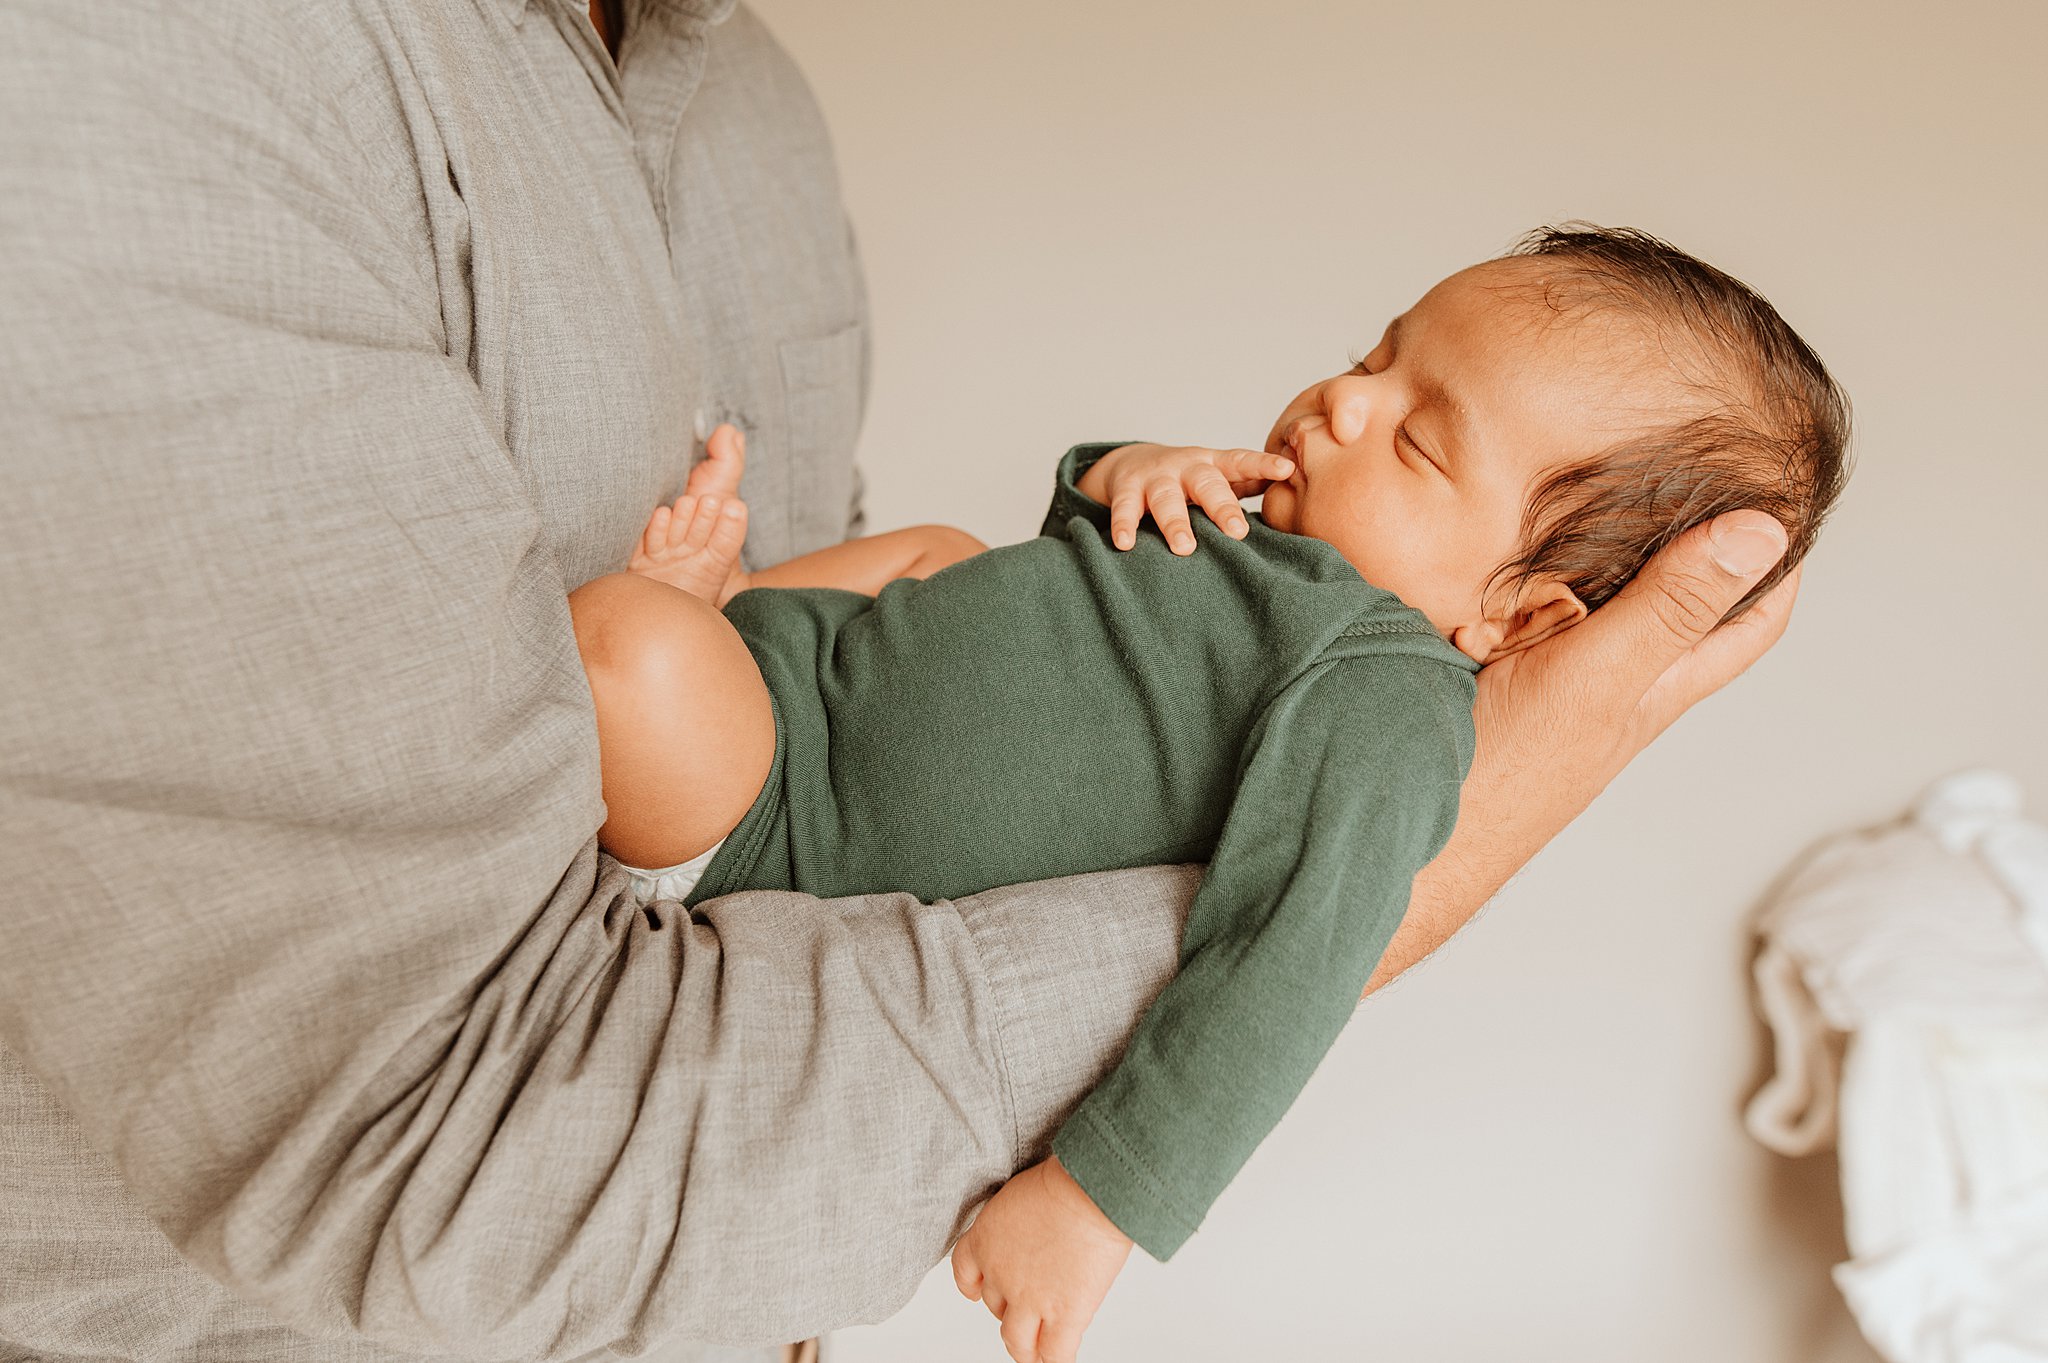 A newborn baby in a green onesie sleeps in dad's arm while he stands thanks to a prenatal chiropractor vancouver